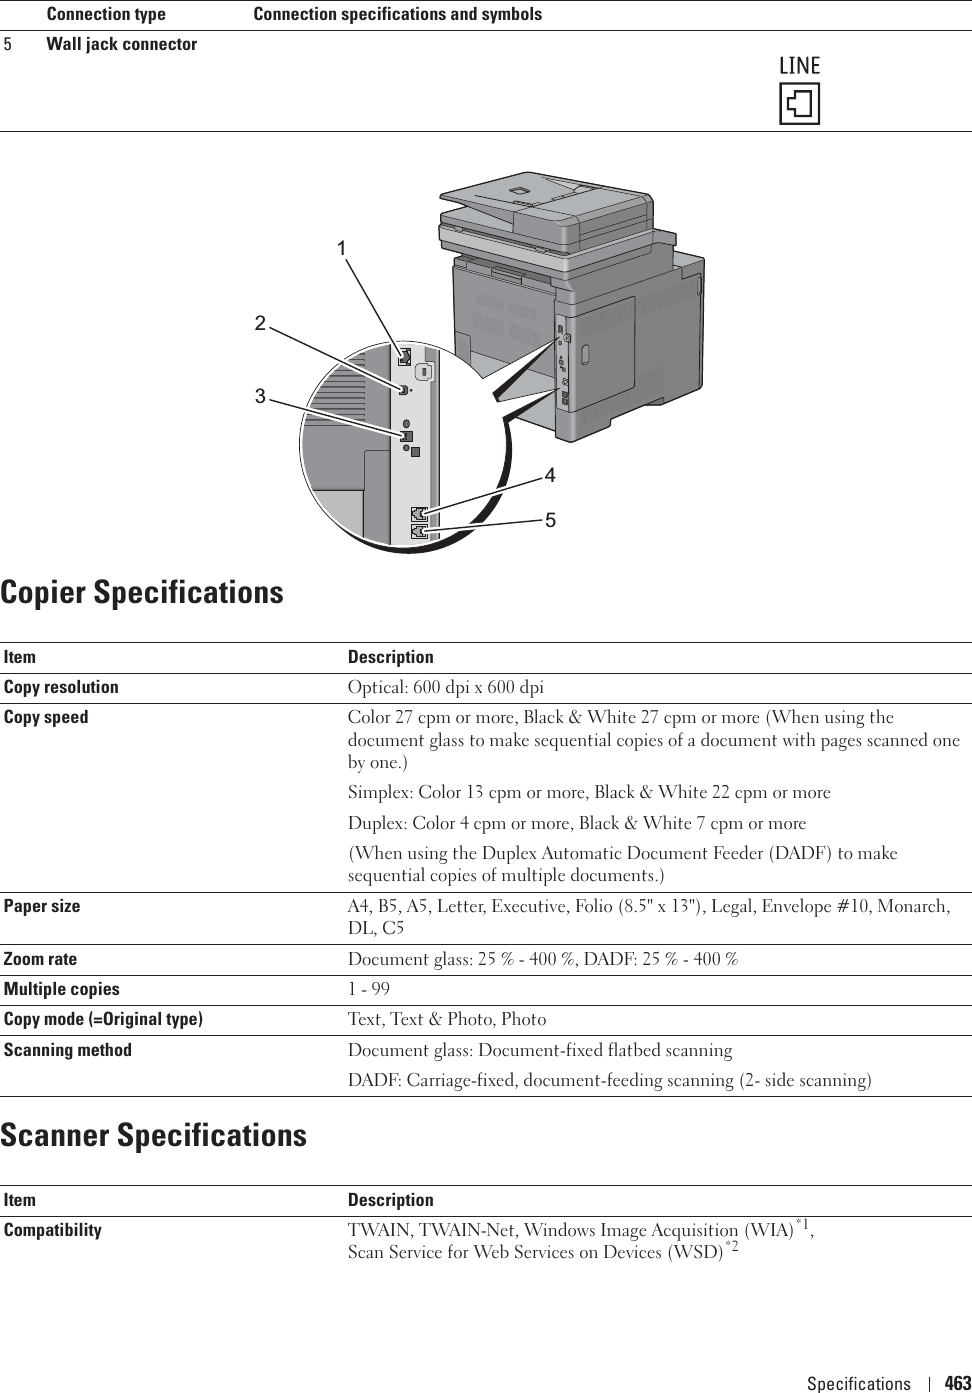 Specifications 463Copier SpecificationsScanner Specifications5Wall jack connectorItem DescriptionCopy resolution Optical: 600 dpi x 600 dpiCopy speed Color 27 cpm or more, Black &amp; White 27 cpm or more (When using the document glass to make sequential copies of a document with pages scanned one by one.)Simplex: Color 13 cpm or more, Black &amp; White 22 cpm or moreDuplex: Color 4 cpm or more, Black &amp; White 7 cpm or more (When using the Duplex Automatic Document Feeder (DADF) to make sequential copies of multiple documents.)Paper size A4, B5, A5, Letter, Executive, Folio (8.5&quot; x 13&quot;), Legal, Envelope #10, Monarch, DL, C5Zoom rate Document glass: 25 % - 400 %, DADF: 25 % - 400 %Multiple copies 1 - 99 Copy mode (=Original type) Text, Text &amp; Photo, PhotoScanning method Document glass: Document-fixed flatbed scanningDADF: Carriage-fixed, document-feeding scanning (2- side scanning)Item DescriptionCompatibility TWAIN, TWAIN-Net, Windows Image Acquisition (WIA)*1, Scan Service for Web Services on Devices (WSD)*2Connection type Connection specifications and symbols12345